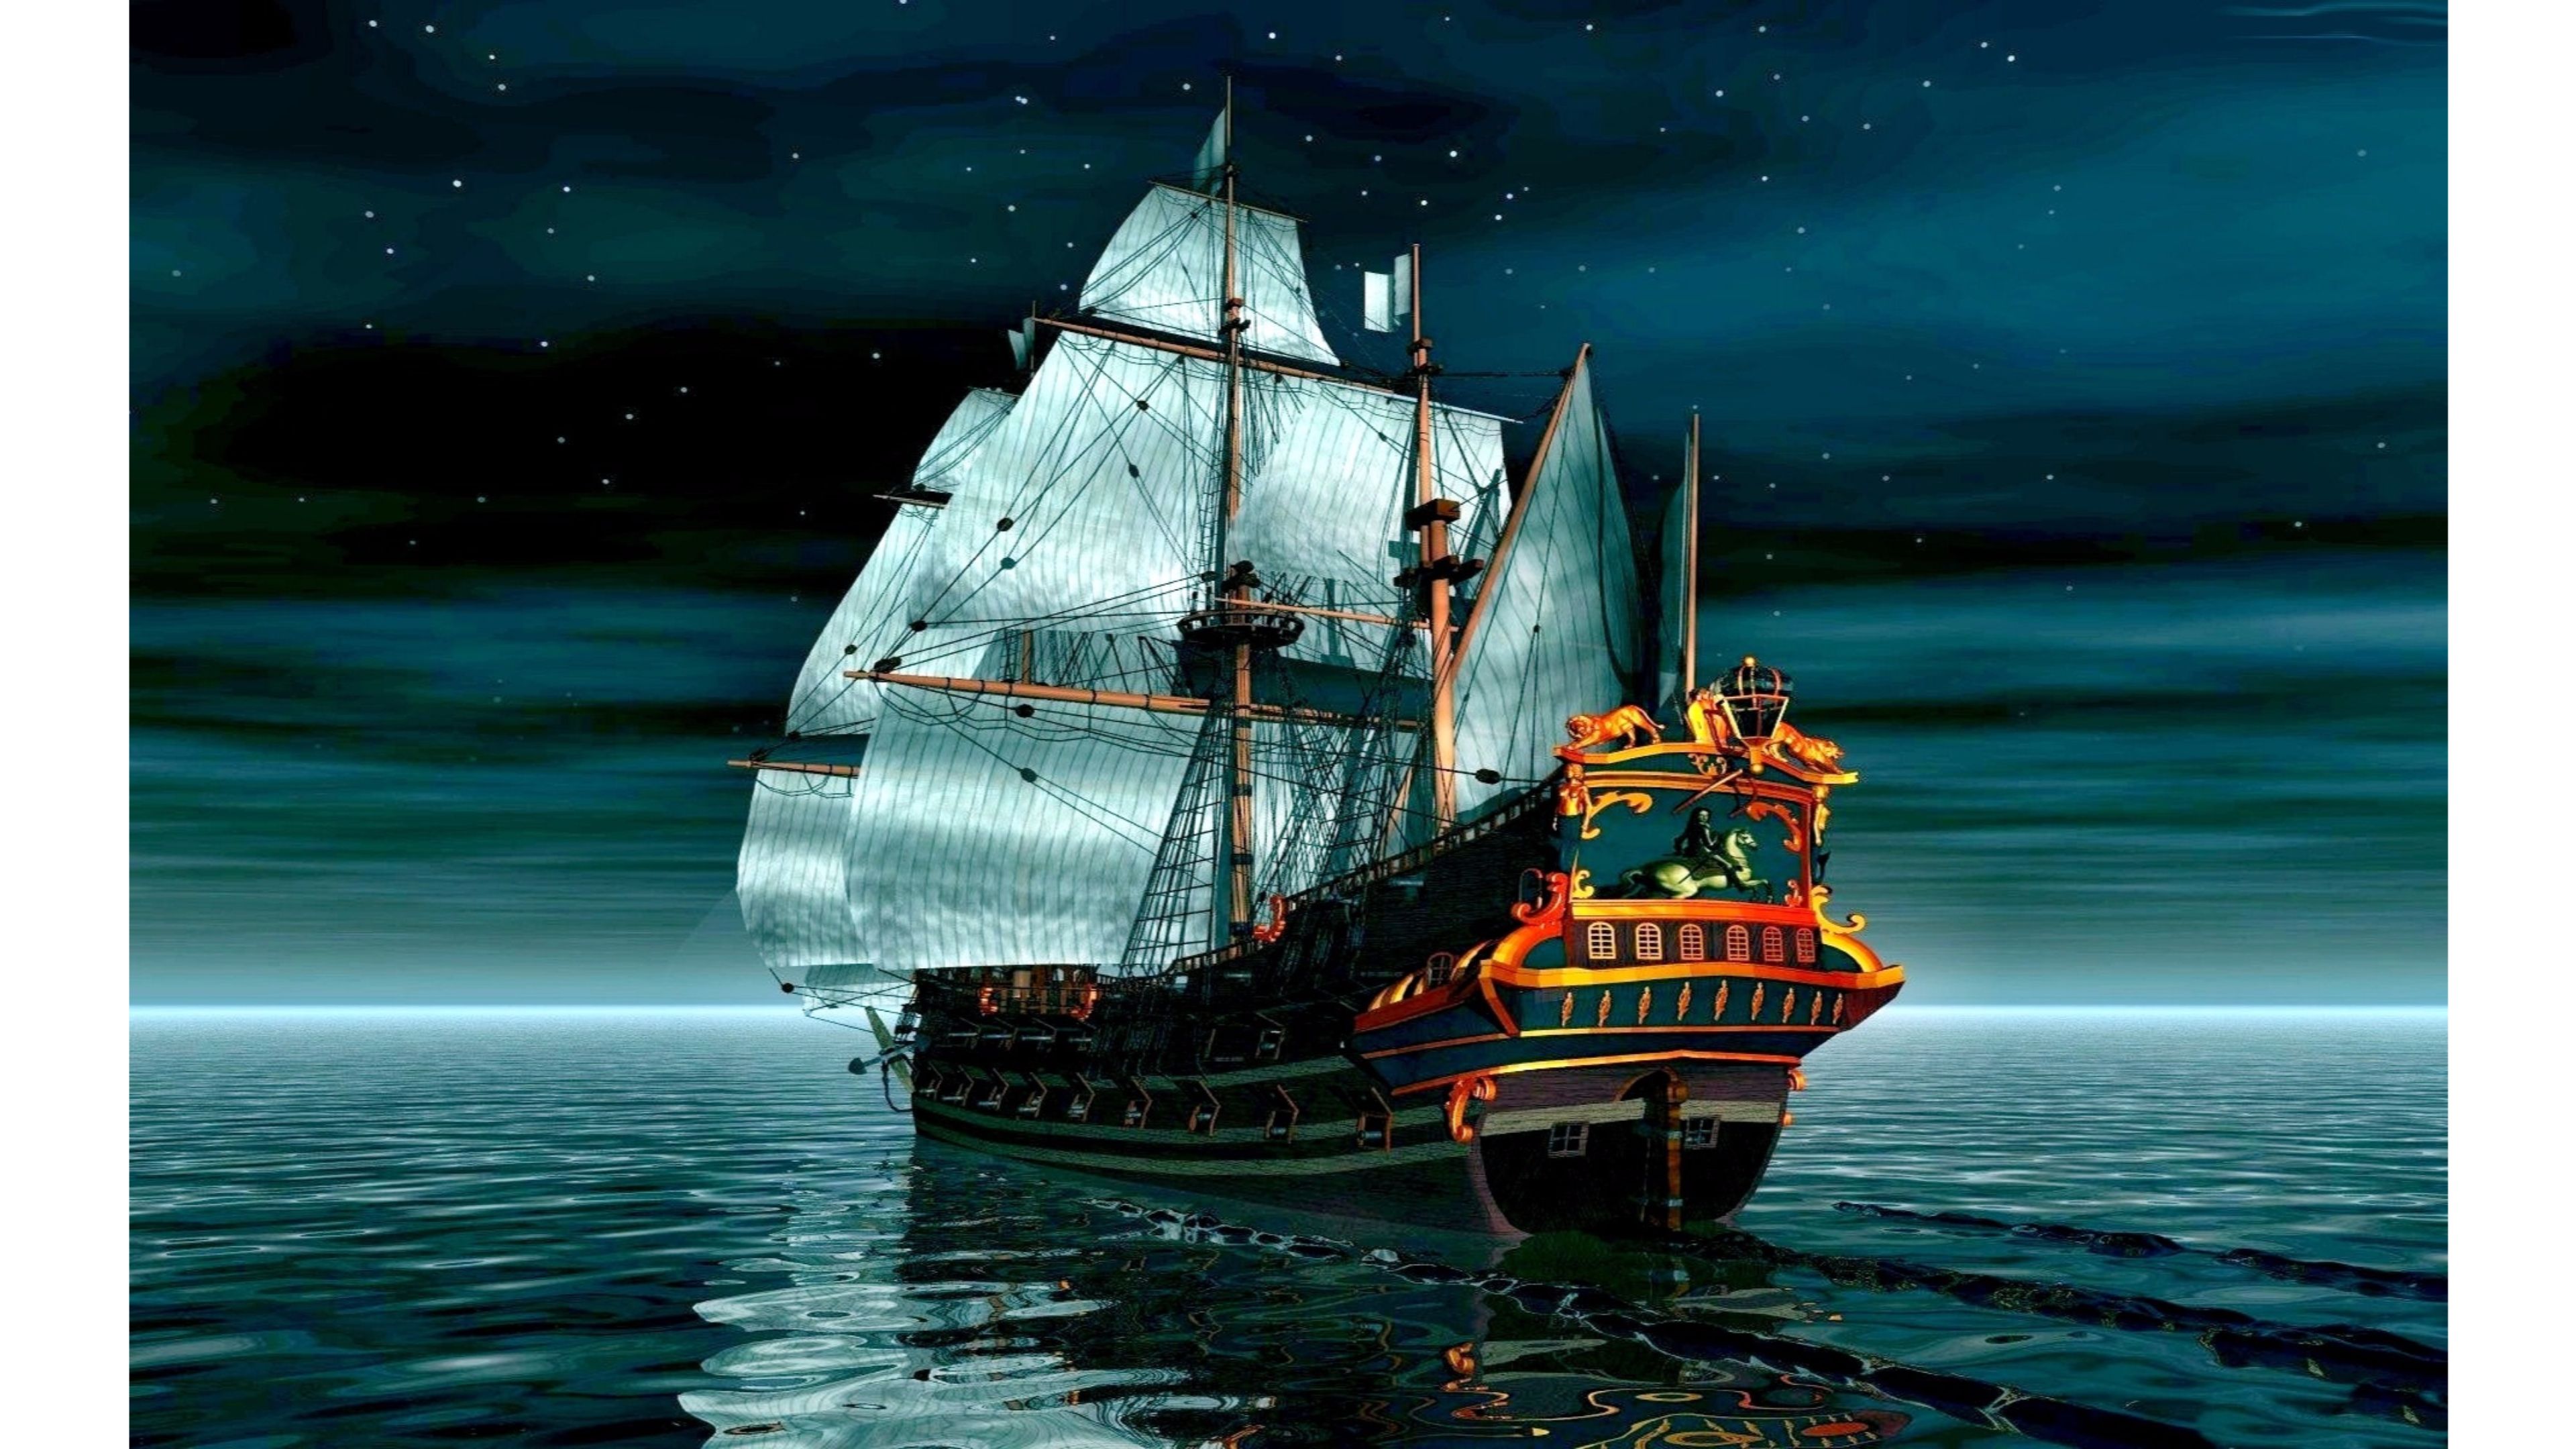 Pirate Ship Wallpaper Hd Click To View Pictures toon